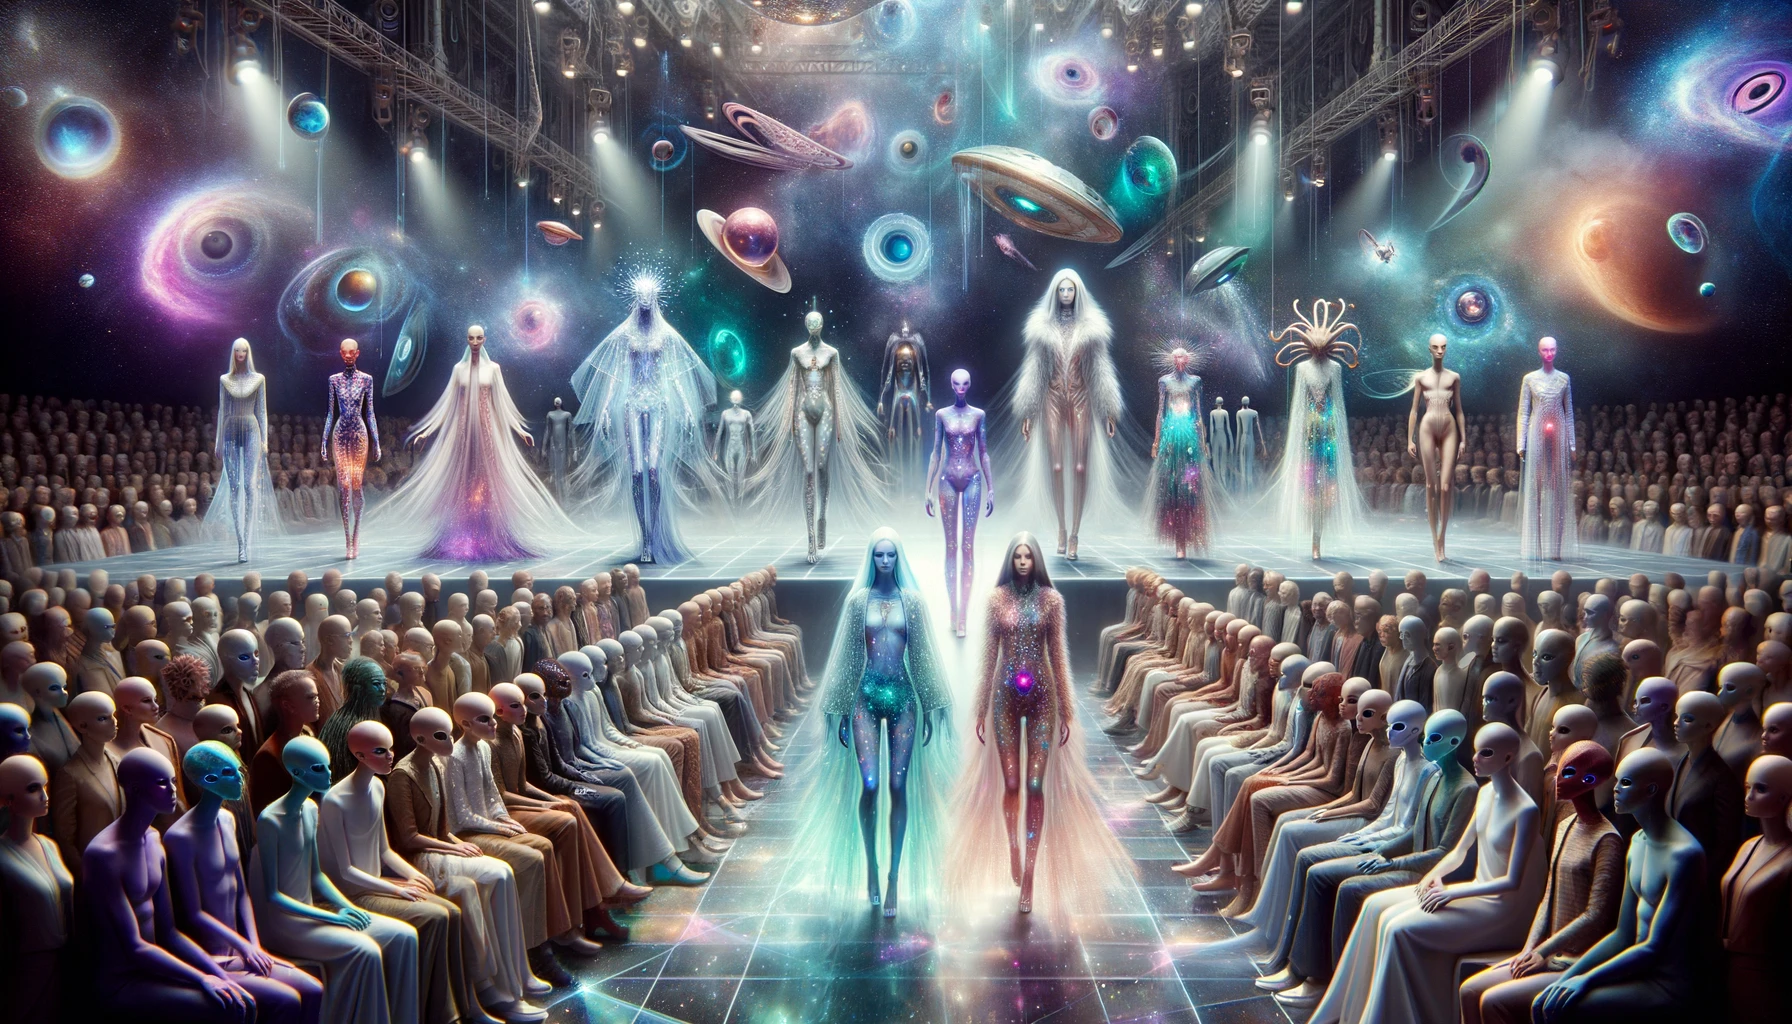 Artistic depiction of a runway show that redefines fashion. Models, representing the diversity of the future, wear outfits that are a blend of ethereal light, dynamic holograms, and eco-conscious materials. The designs are avant-garde, pushing the boundaries of what is possible in fashion. The audience, made up of various humanoid alien species, watches with rapt attention. Their diverse features, from multiple eyes to unique skin patterns, indicate a gathering of beings from across the cosmos, united by their love for fashion.